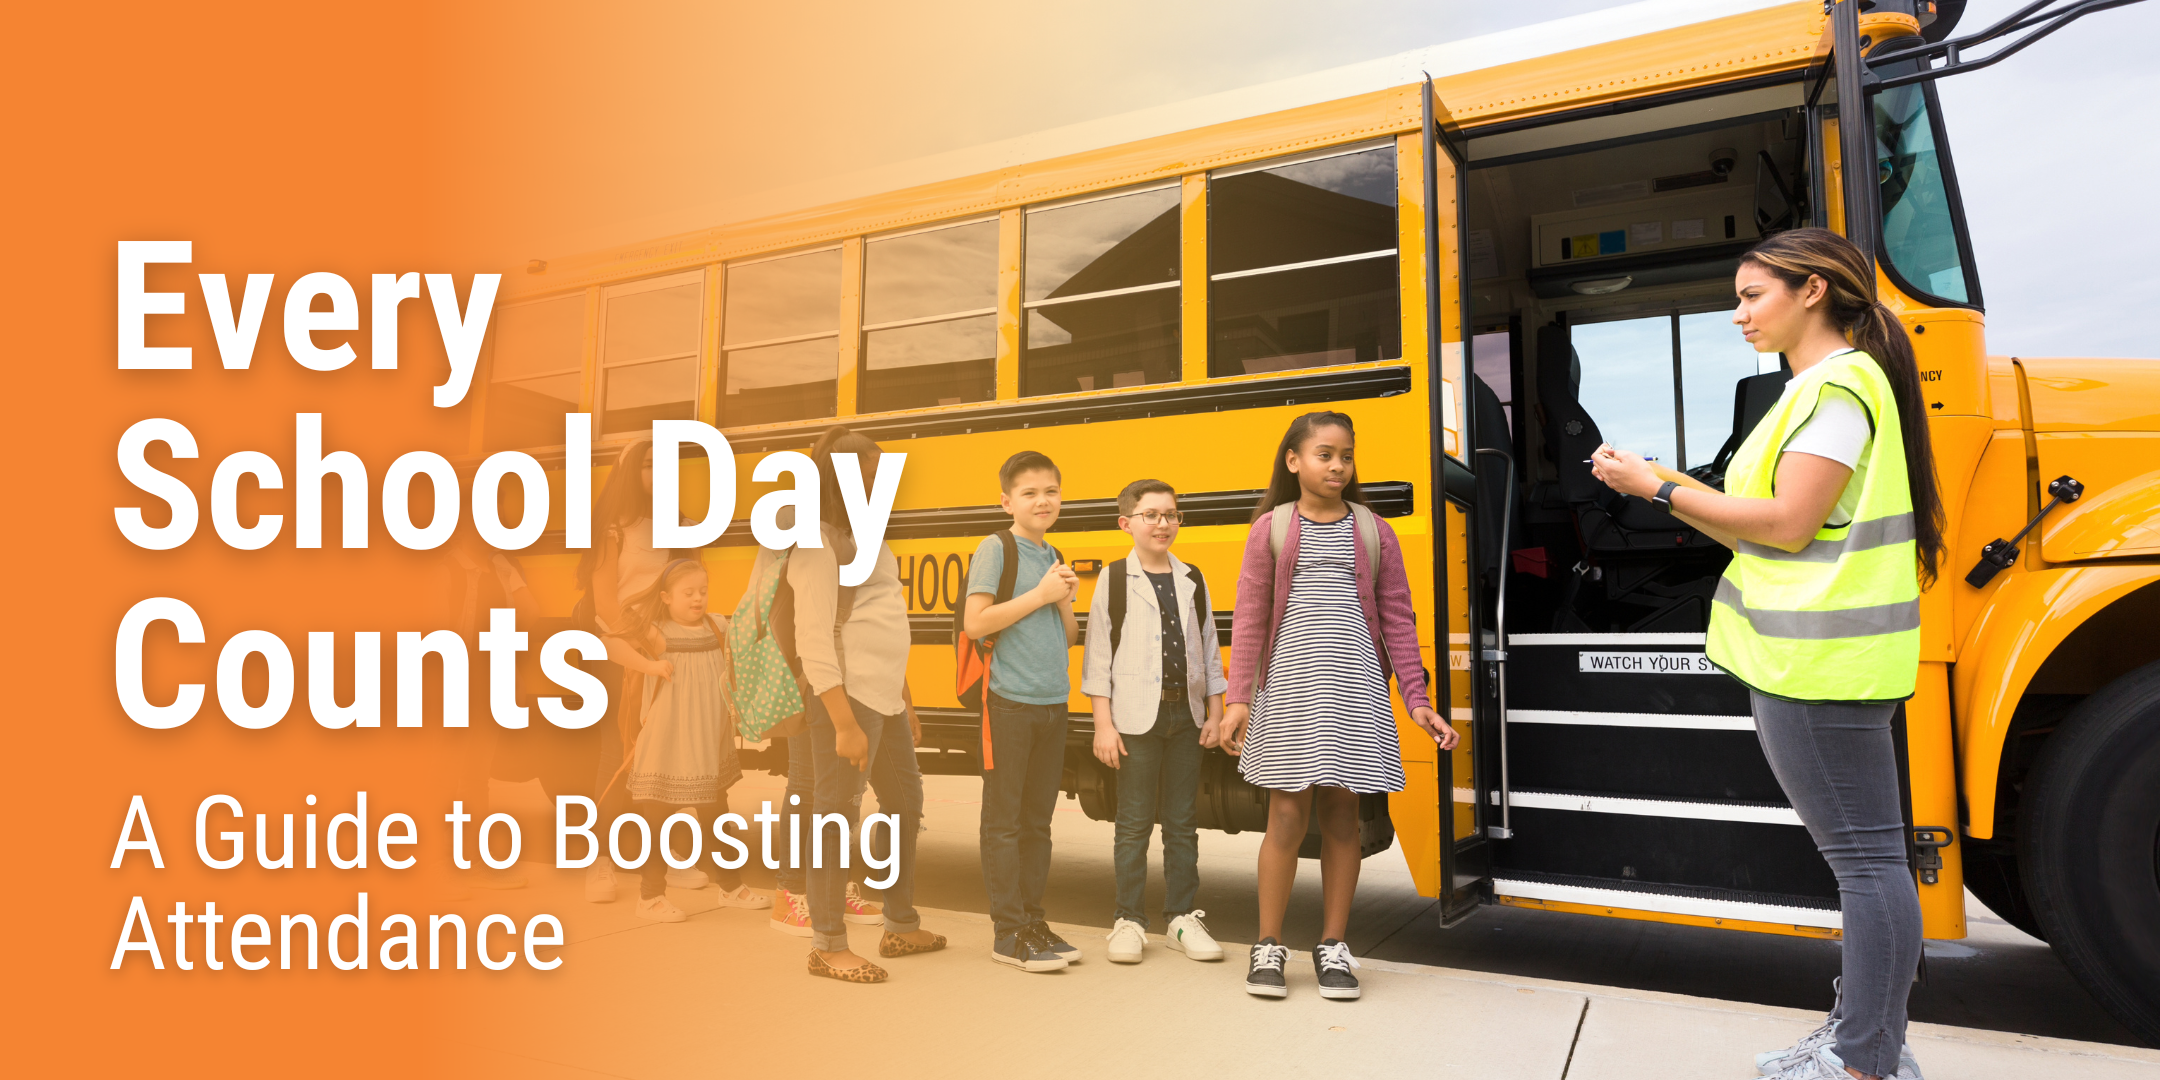 Banner image of children lining up to board a school bus. Tex overlaying of the blog title "Every School Day Counts: A Guide to Boosting Attendance".